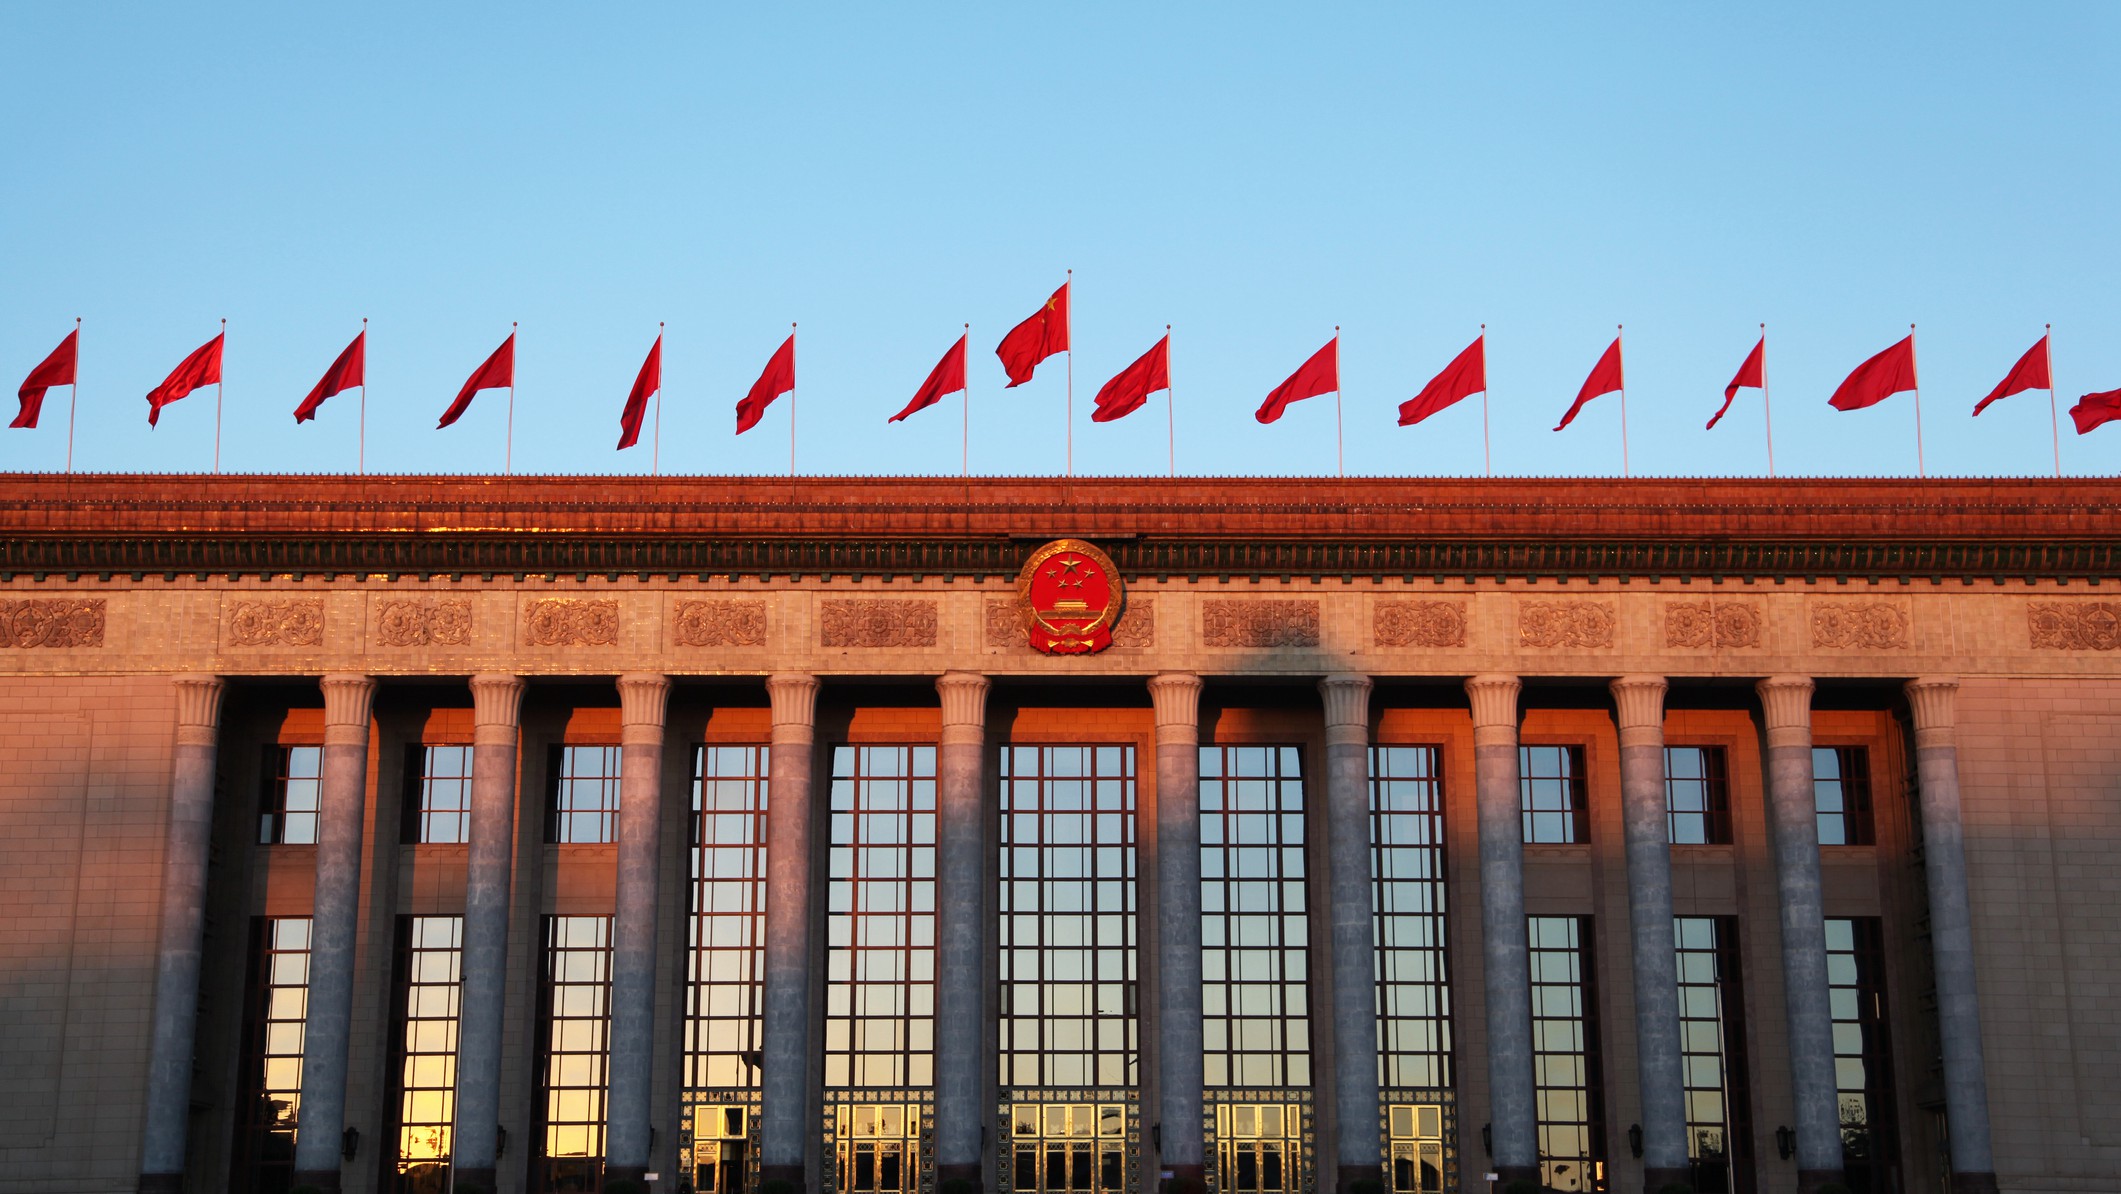 The Great Hall of the People in Beijing, China. /Getty